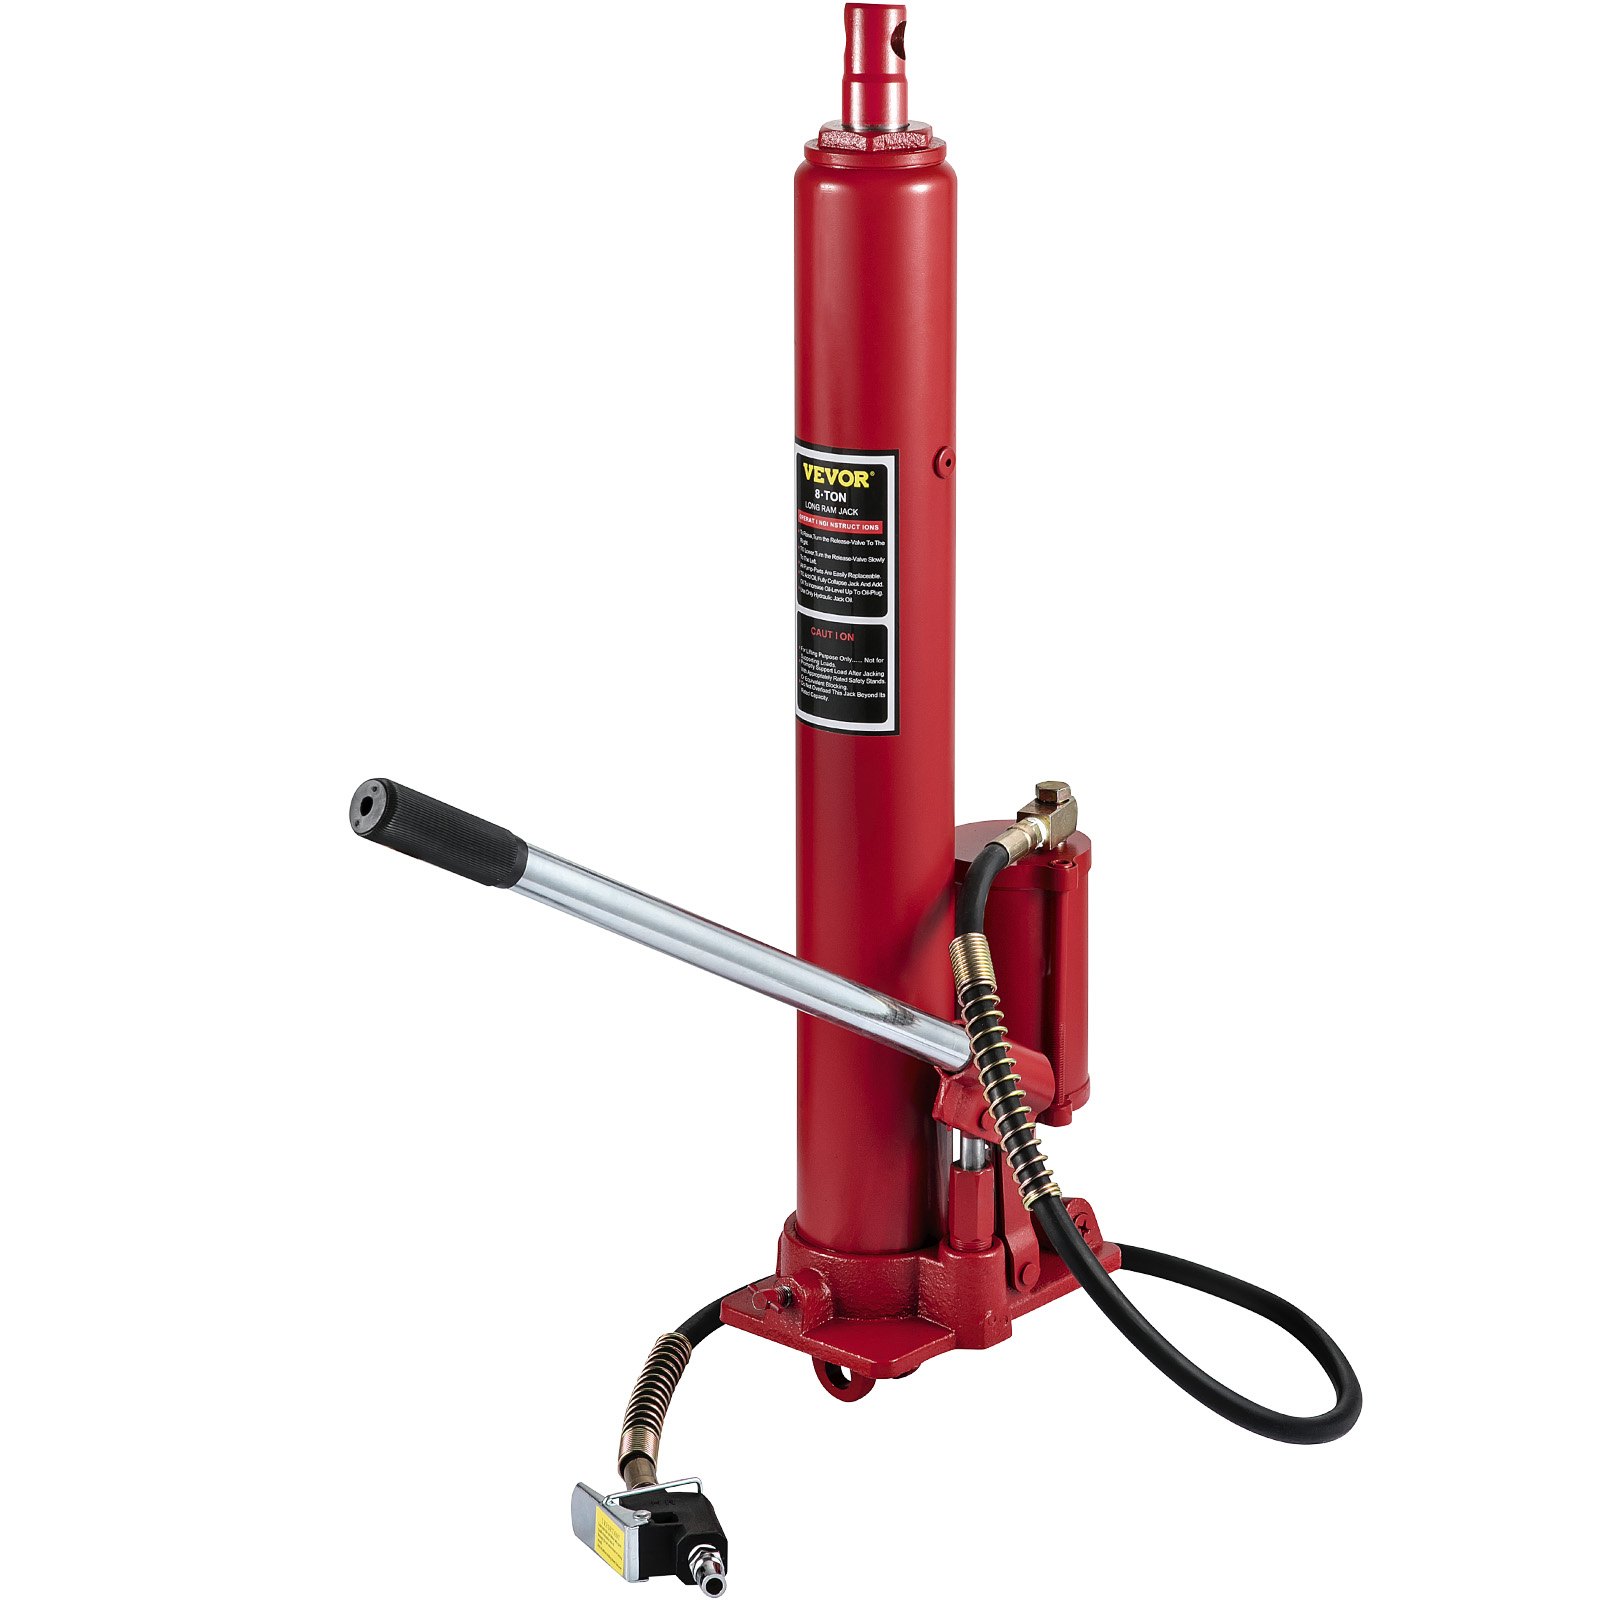 Vevor Hydraulicpneumatic Long Ram Jack 8 Tons17363 Lbs Capacity With Single Piston Pump And 6439